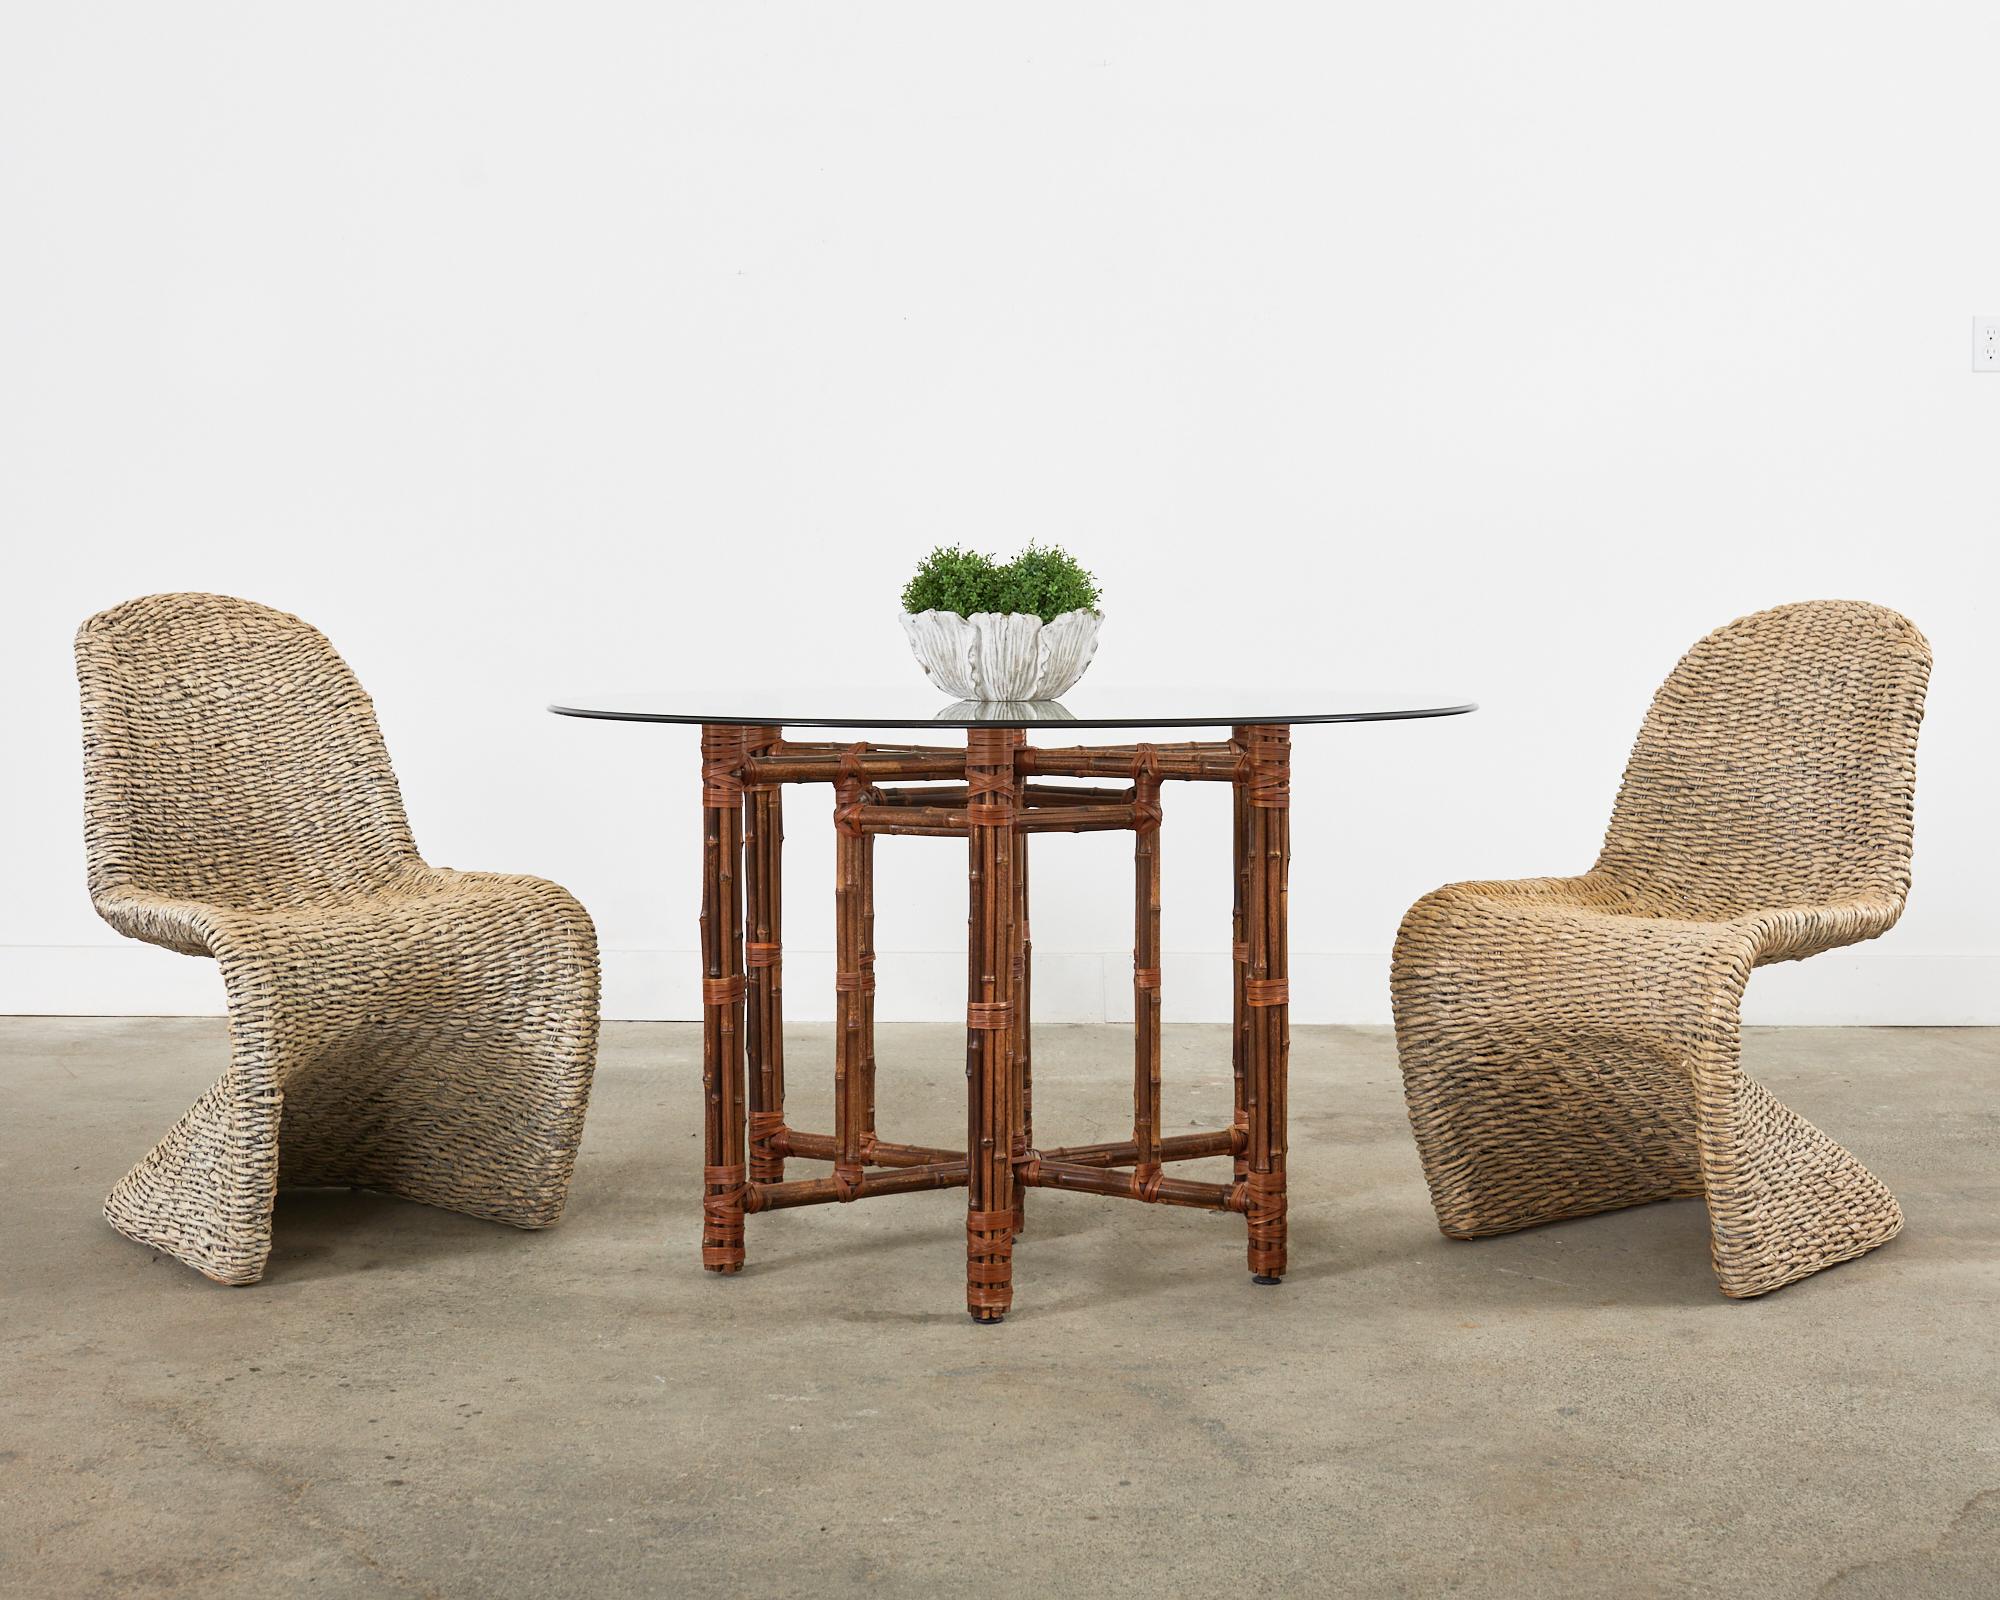 Stylish set of eight woven leaf wicker dining chairs made in the Mid-Century Modern manner and style of Verner Panton. The chairs feature a gracefully curved metal frame completely wrapped with woven leaf wicker. Excellent joinery and craftsmanship